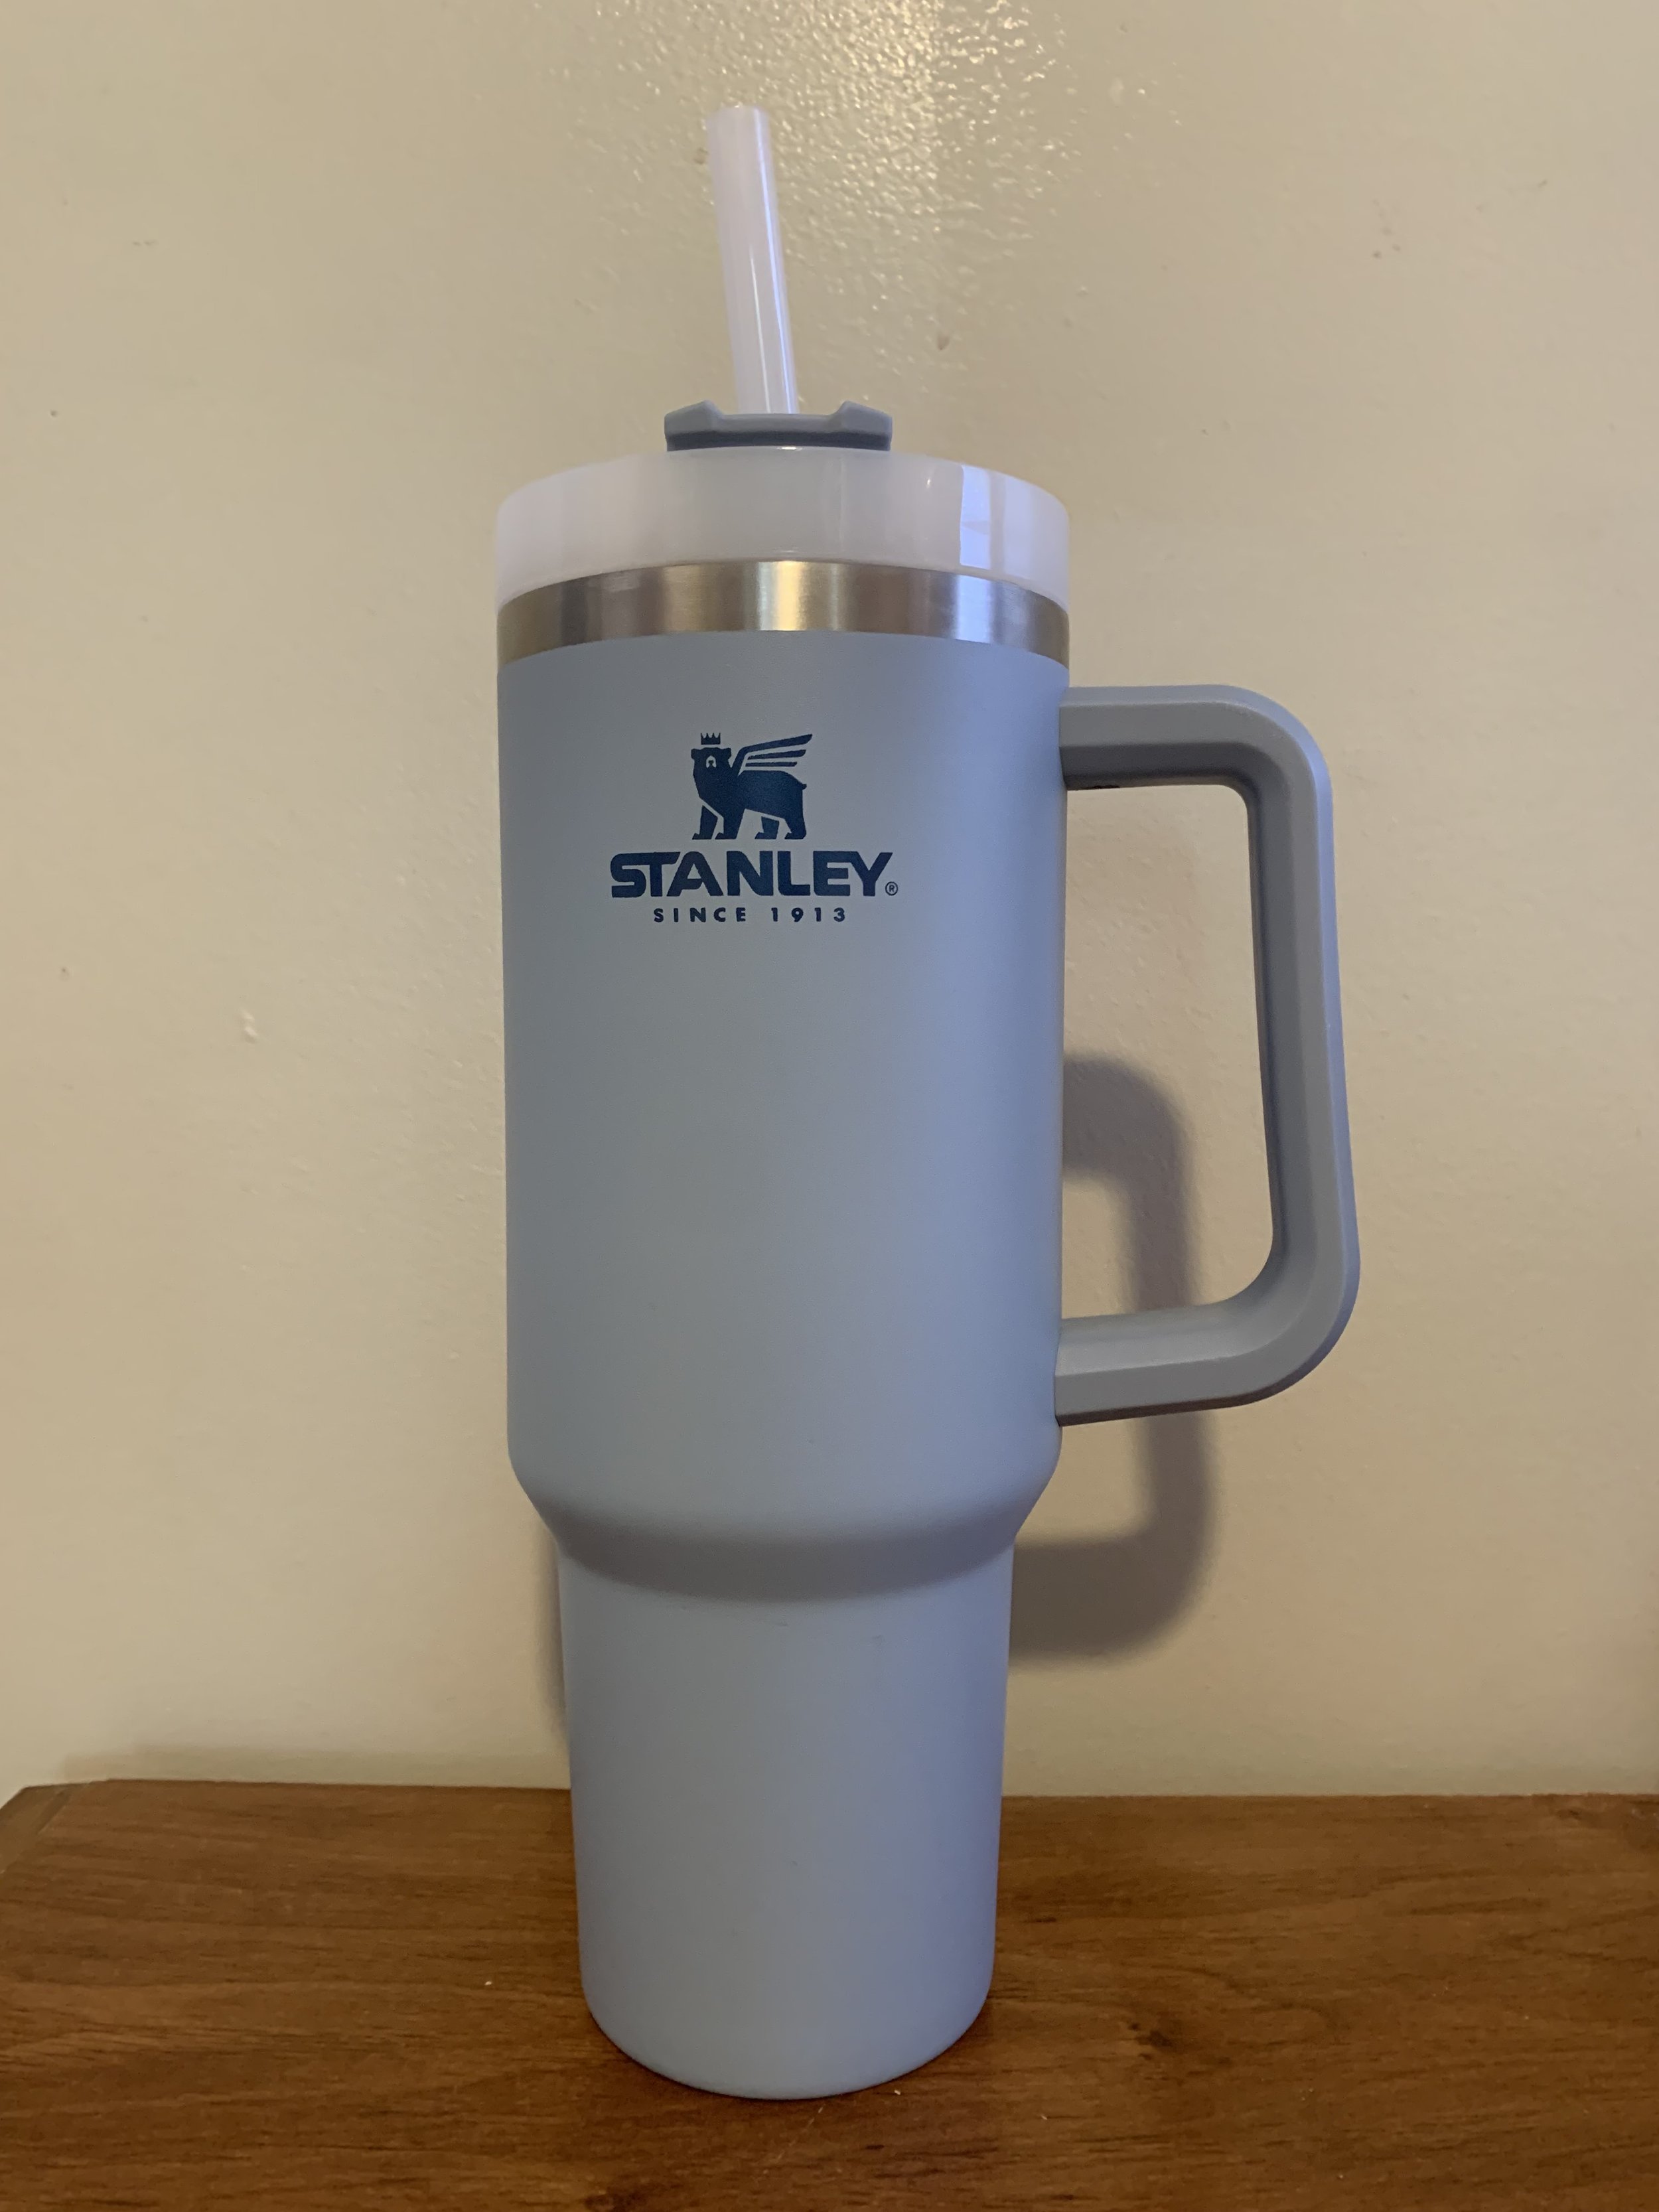 Replying to @shanky1976 #stanley #stanleytumbler #cotd #niche #cupsoft, stanley tumbler